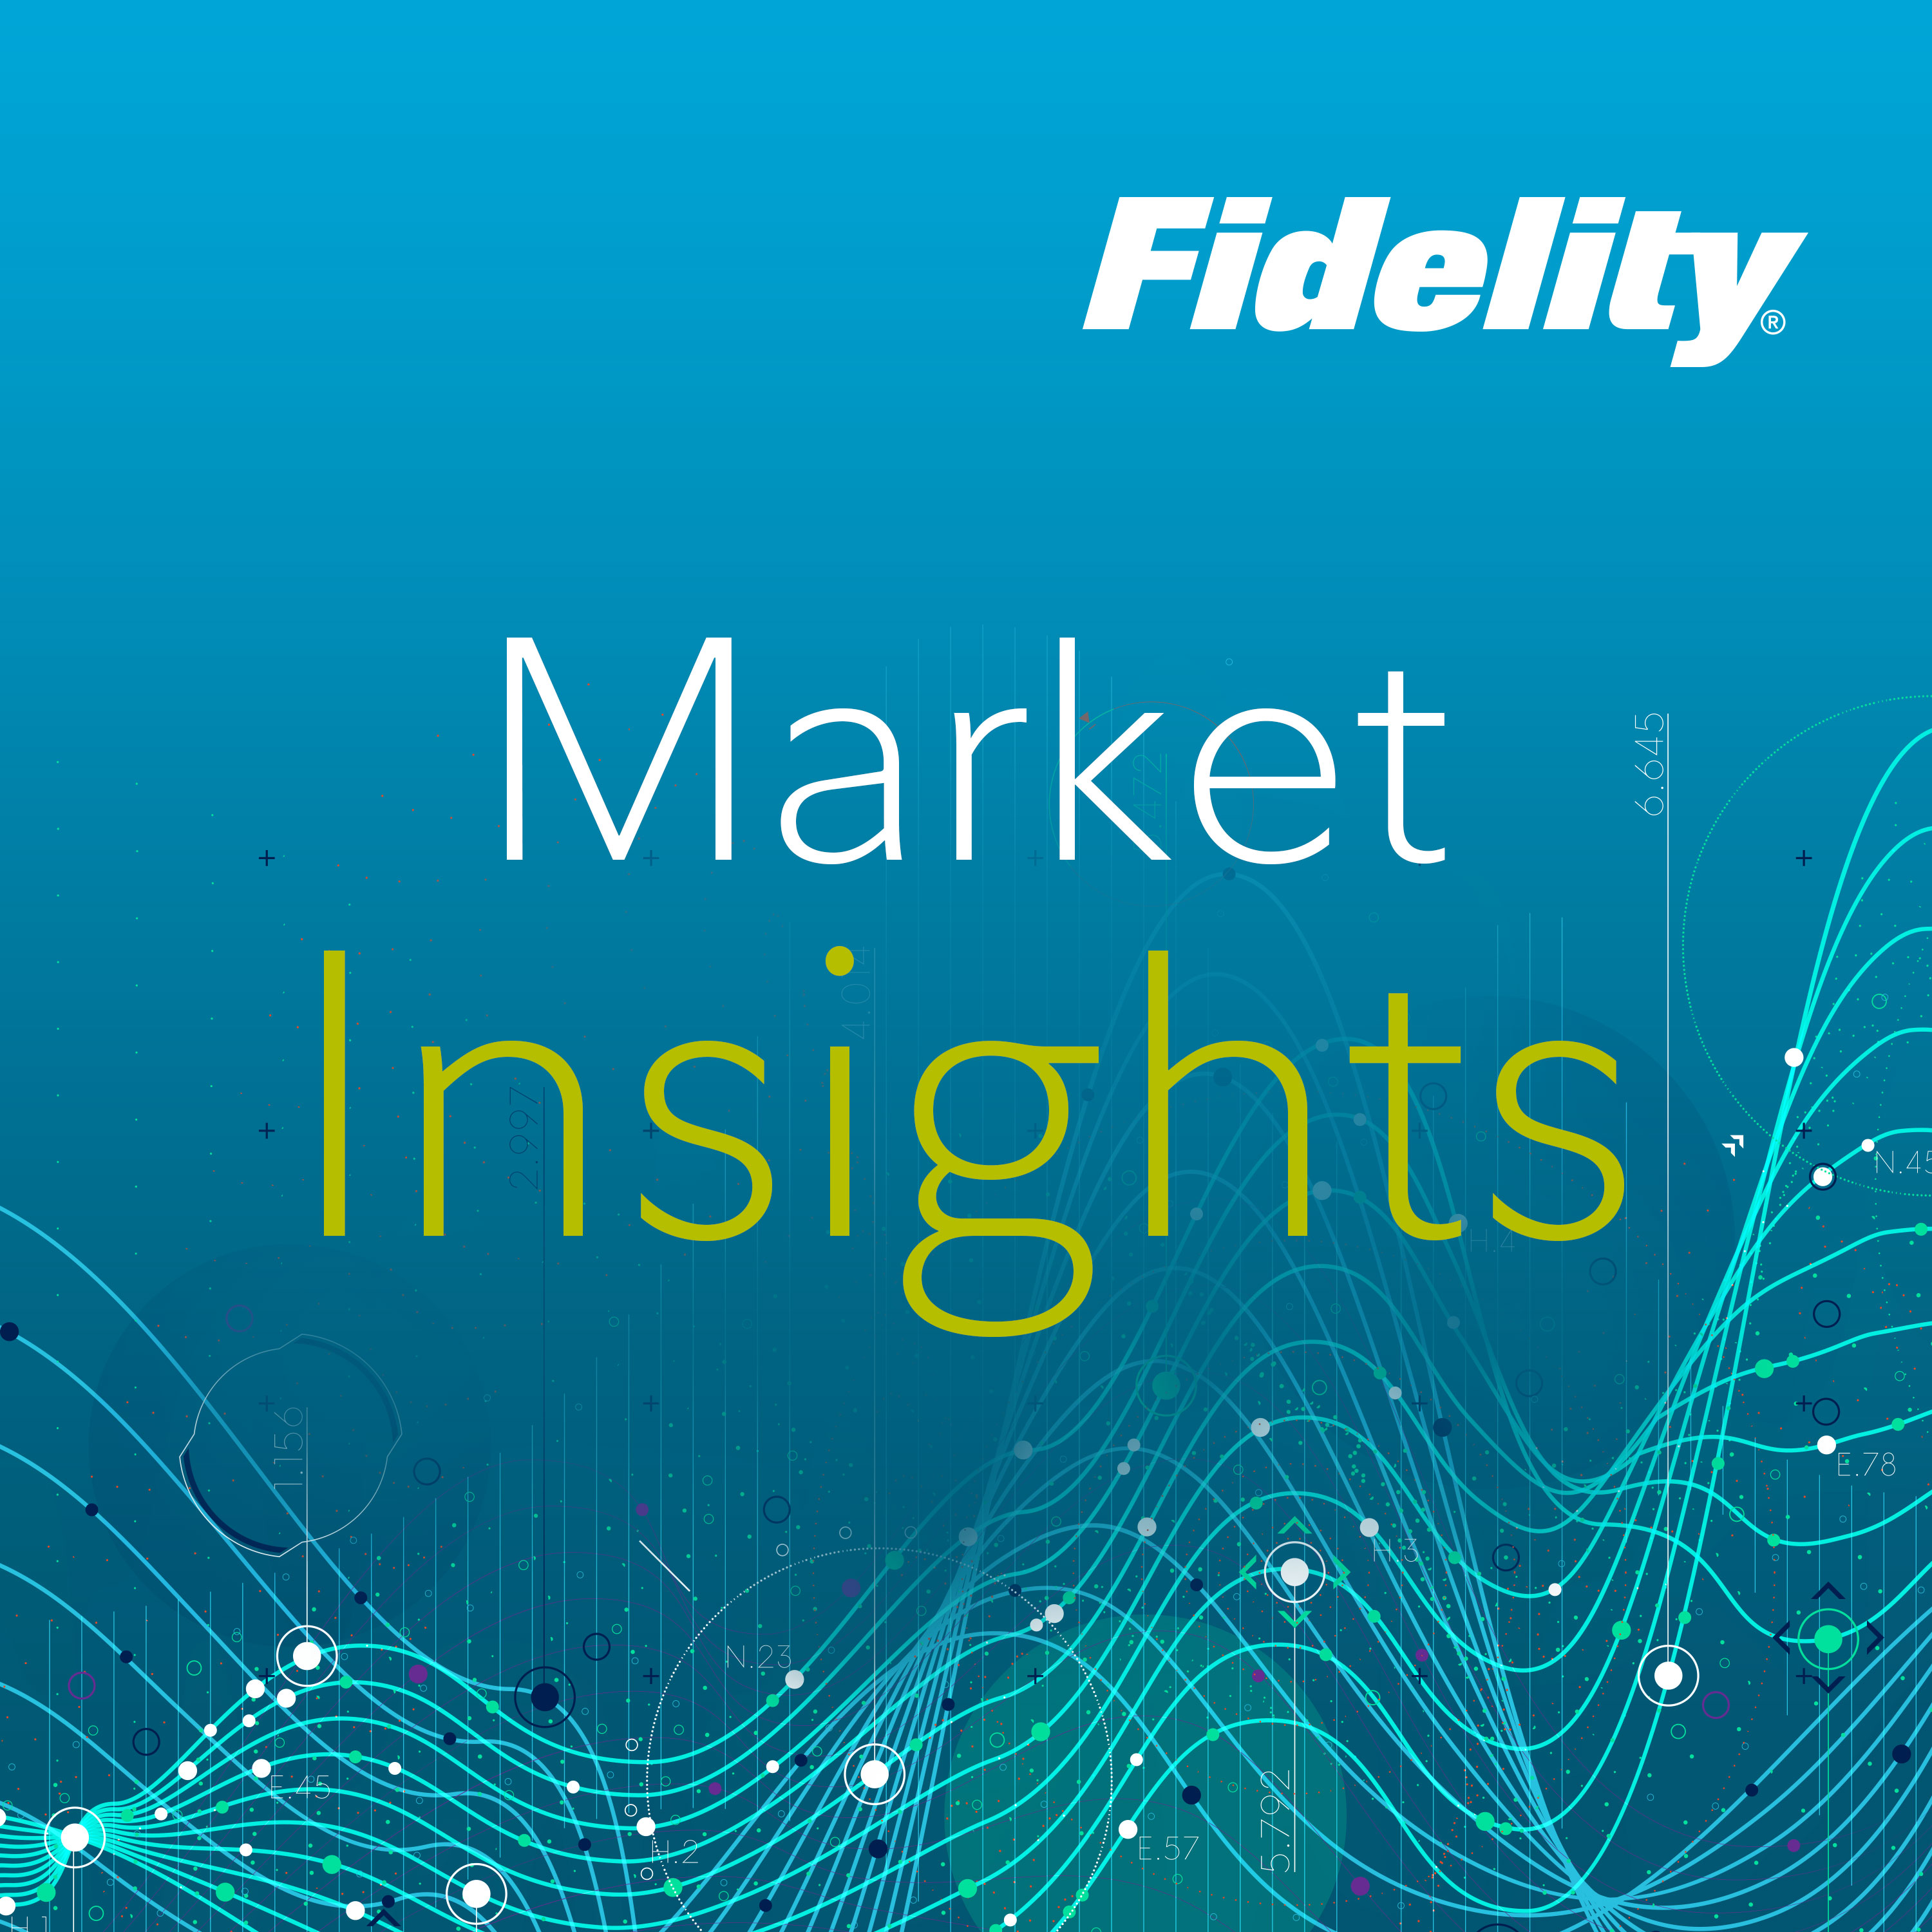 Market Insights: A backdrop for the current market factors and the outlook of a growth investor